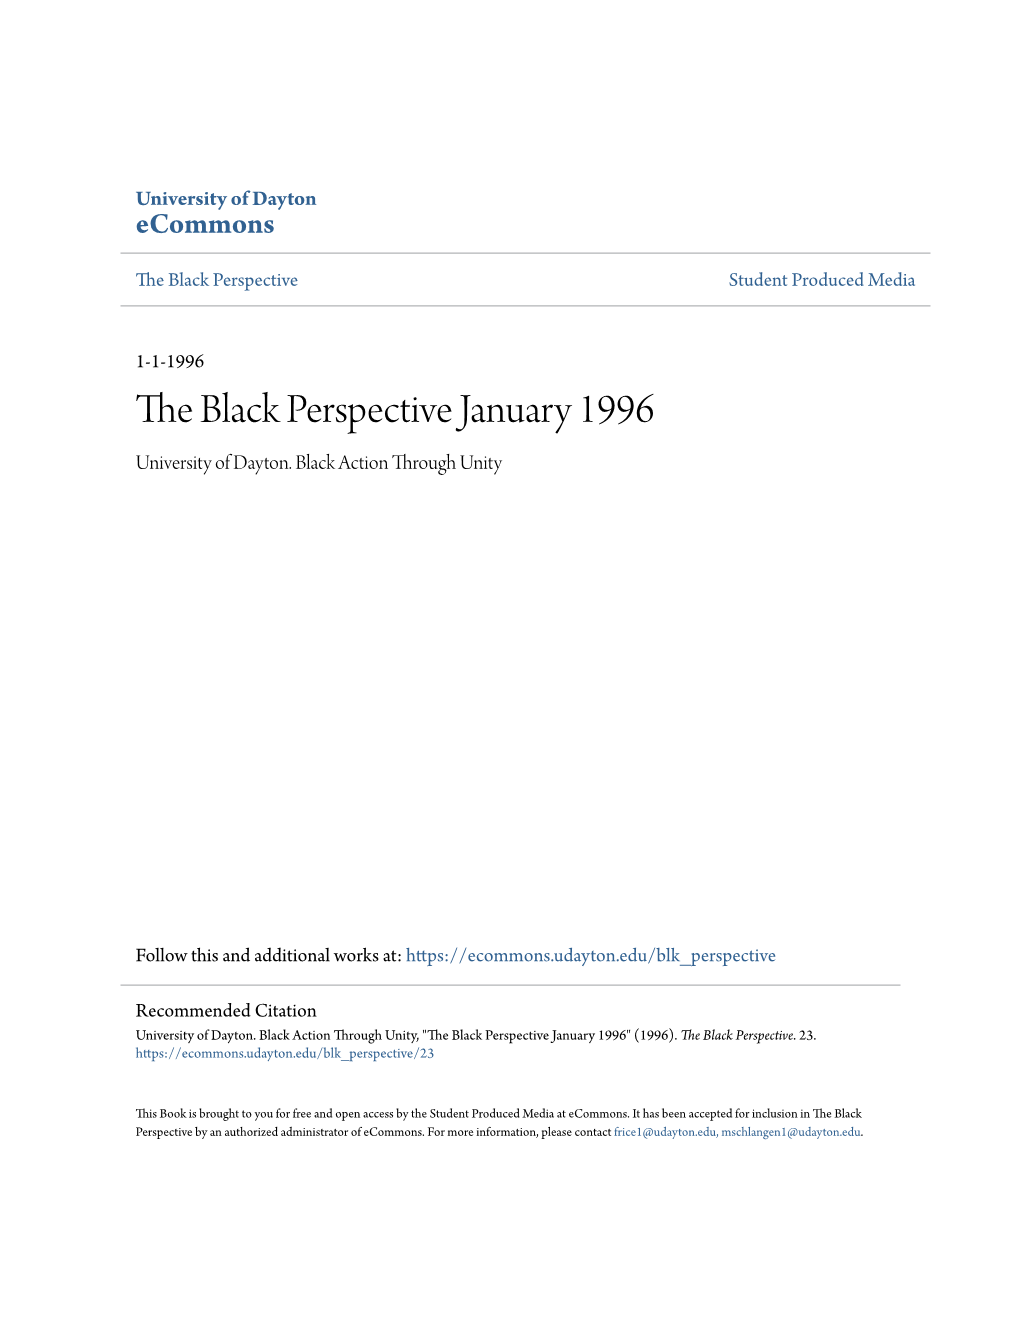 The Black Perspective January 1996